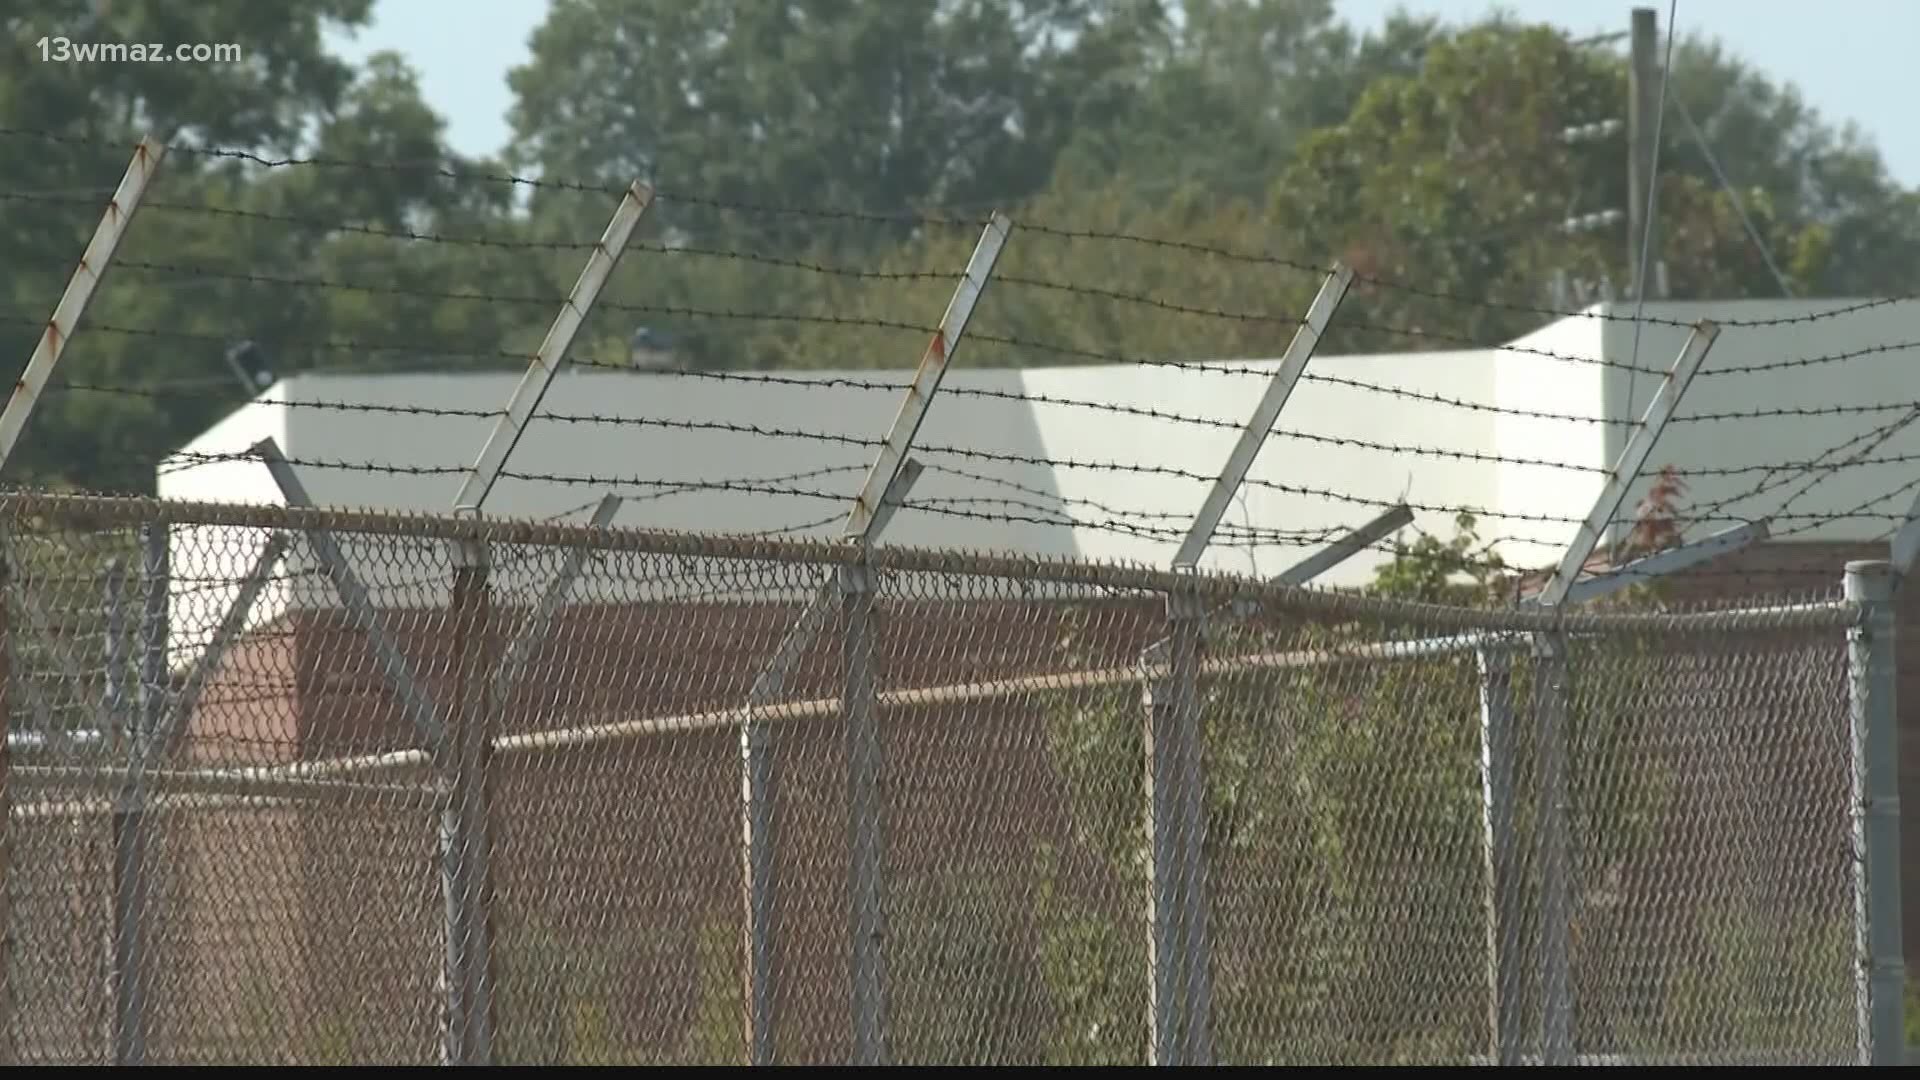 Former Bibb County deputies say overcrowding and cleanliness are problems in the jail, but the biggest concern is safety.